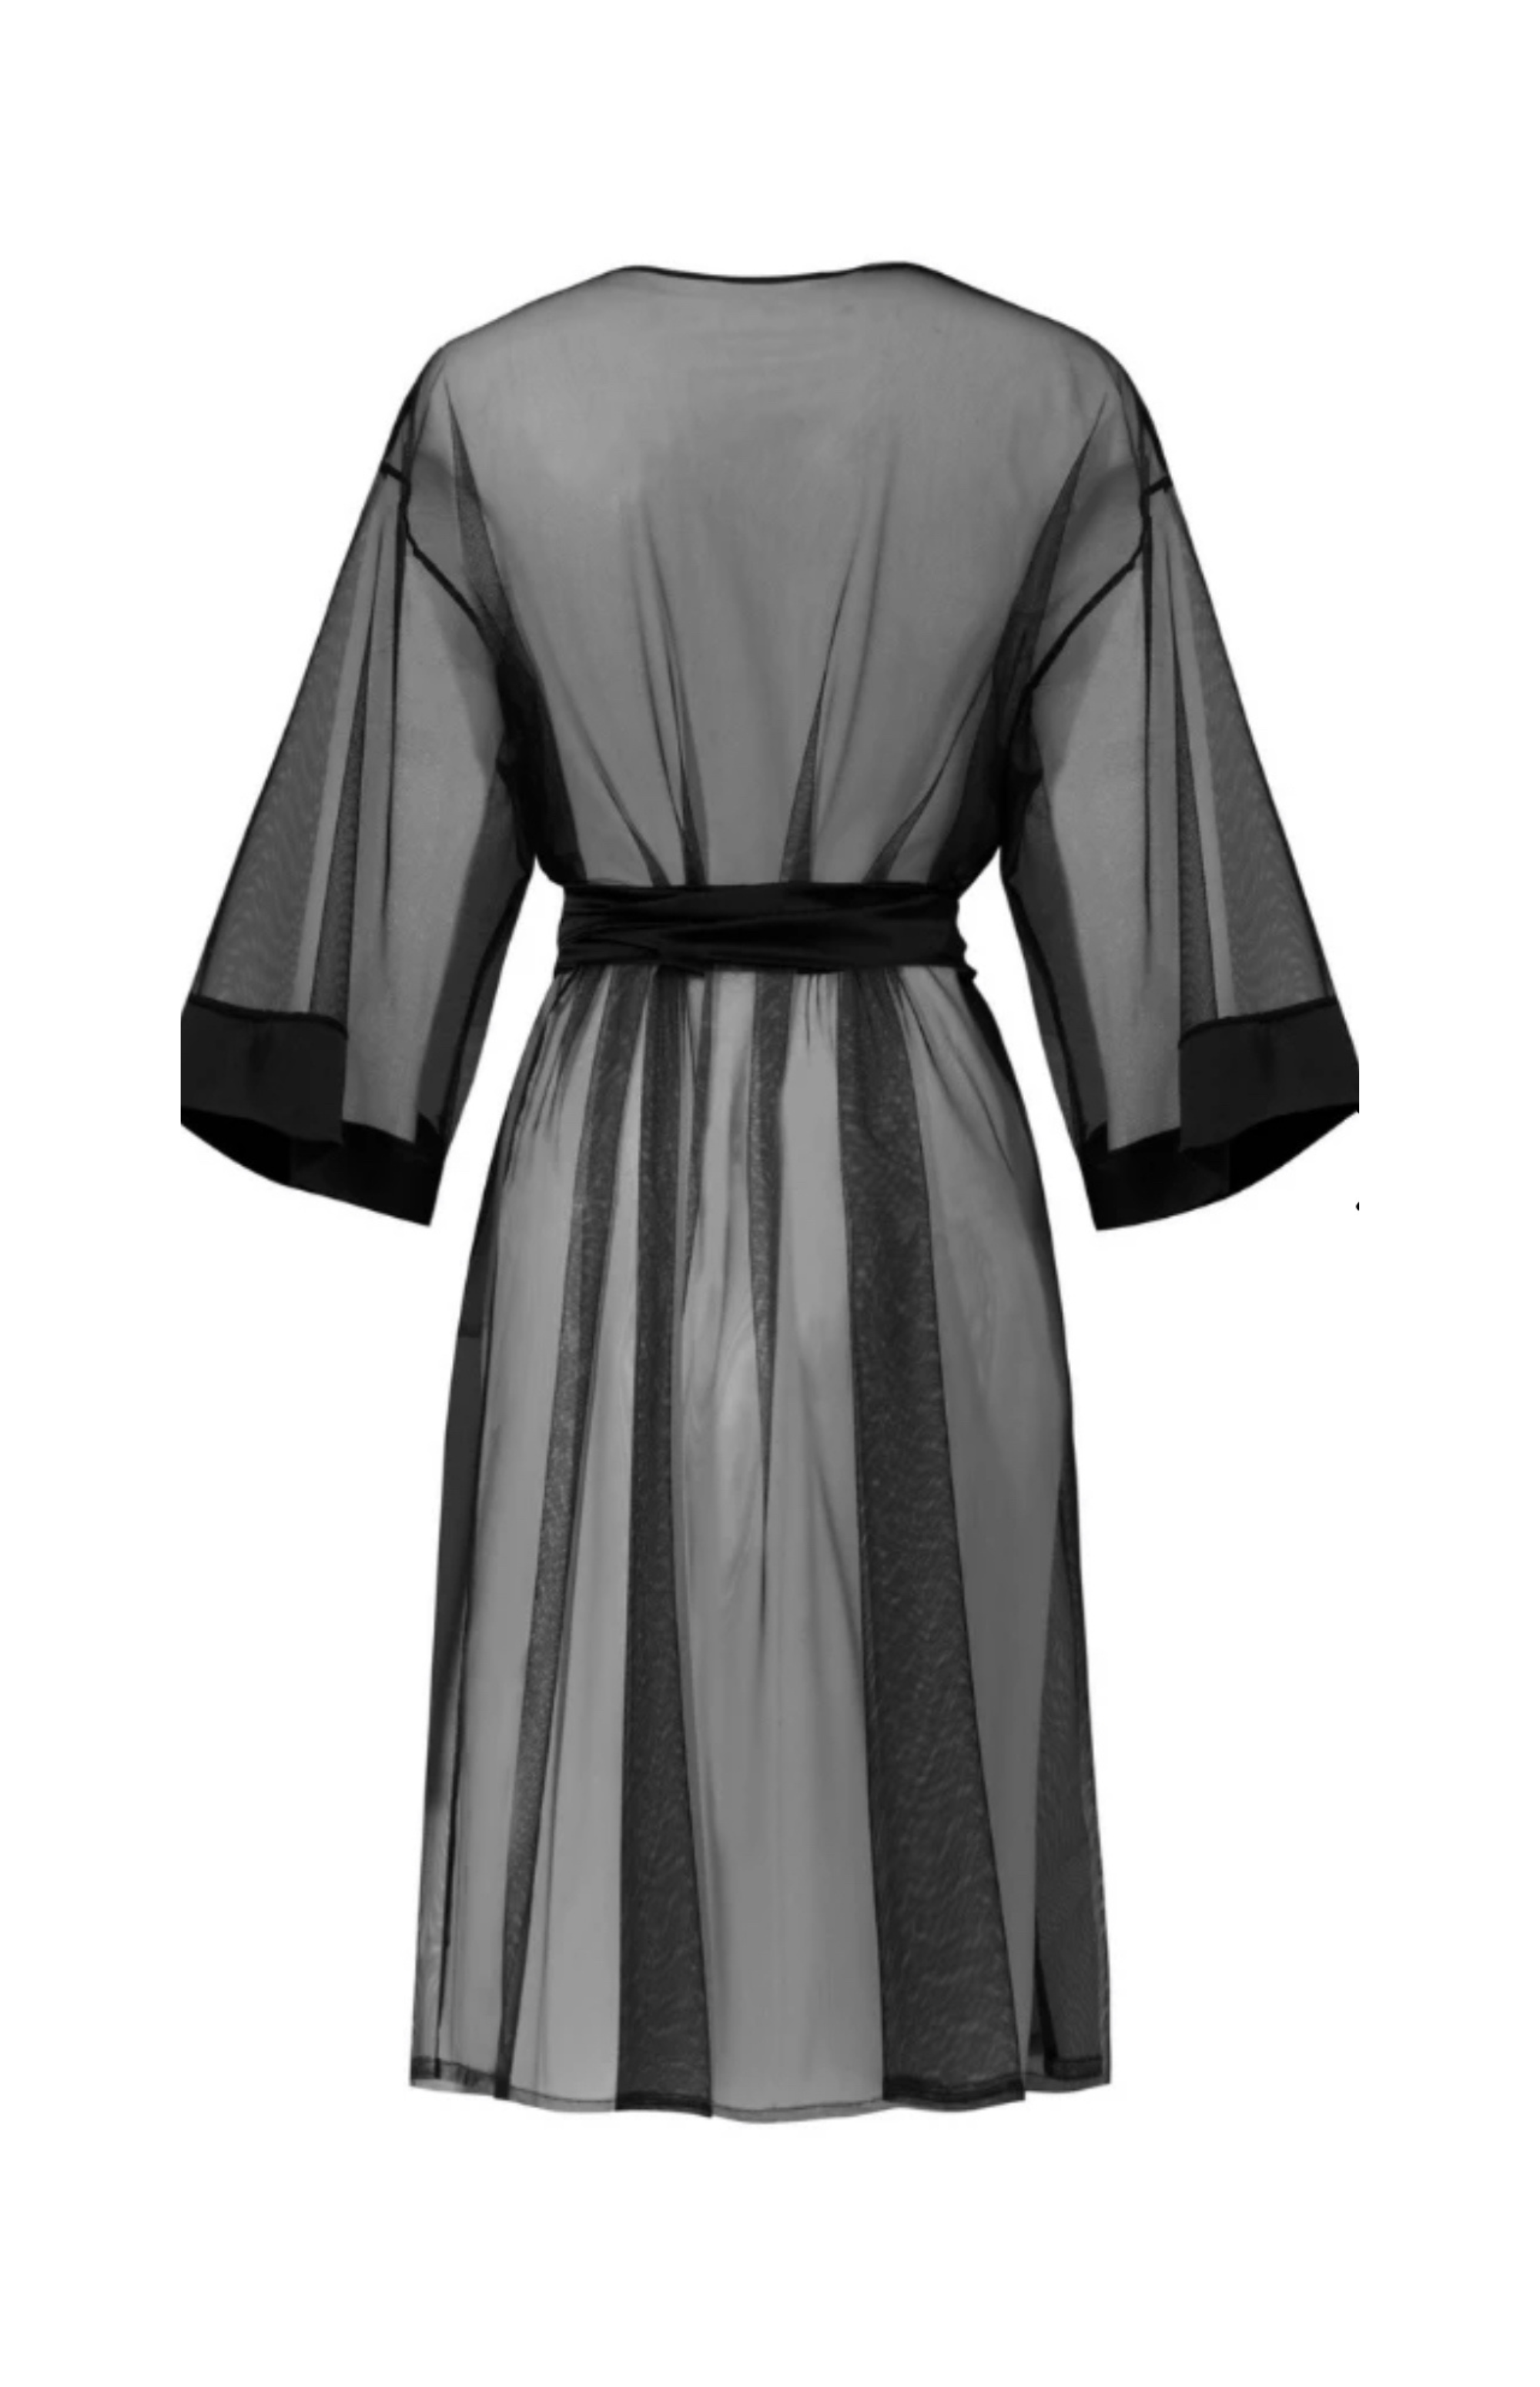 KELLY ROBE dressing gown